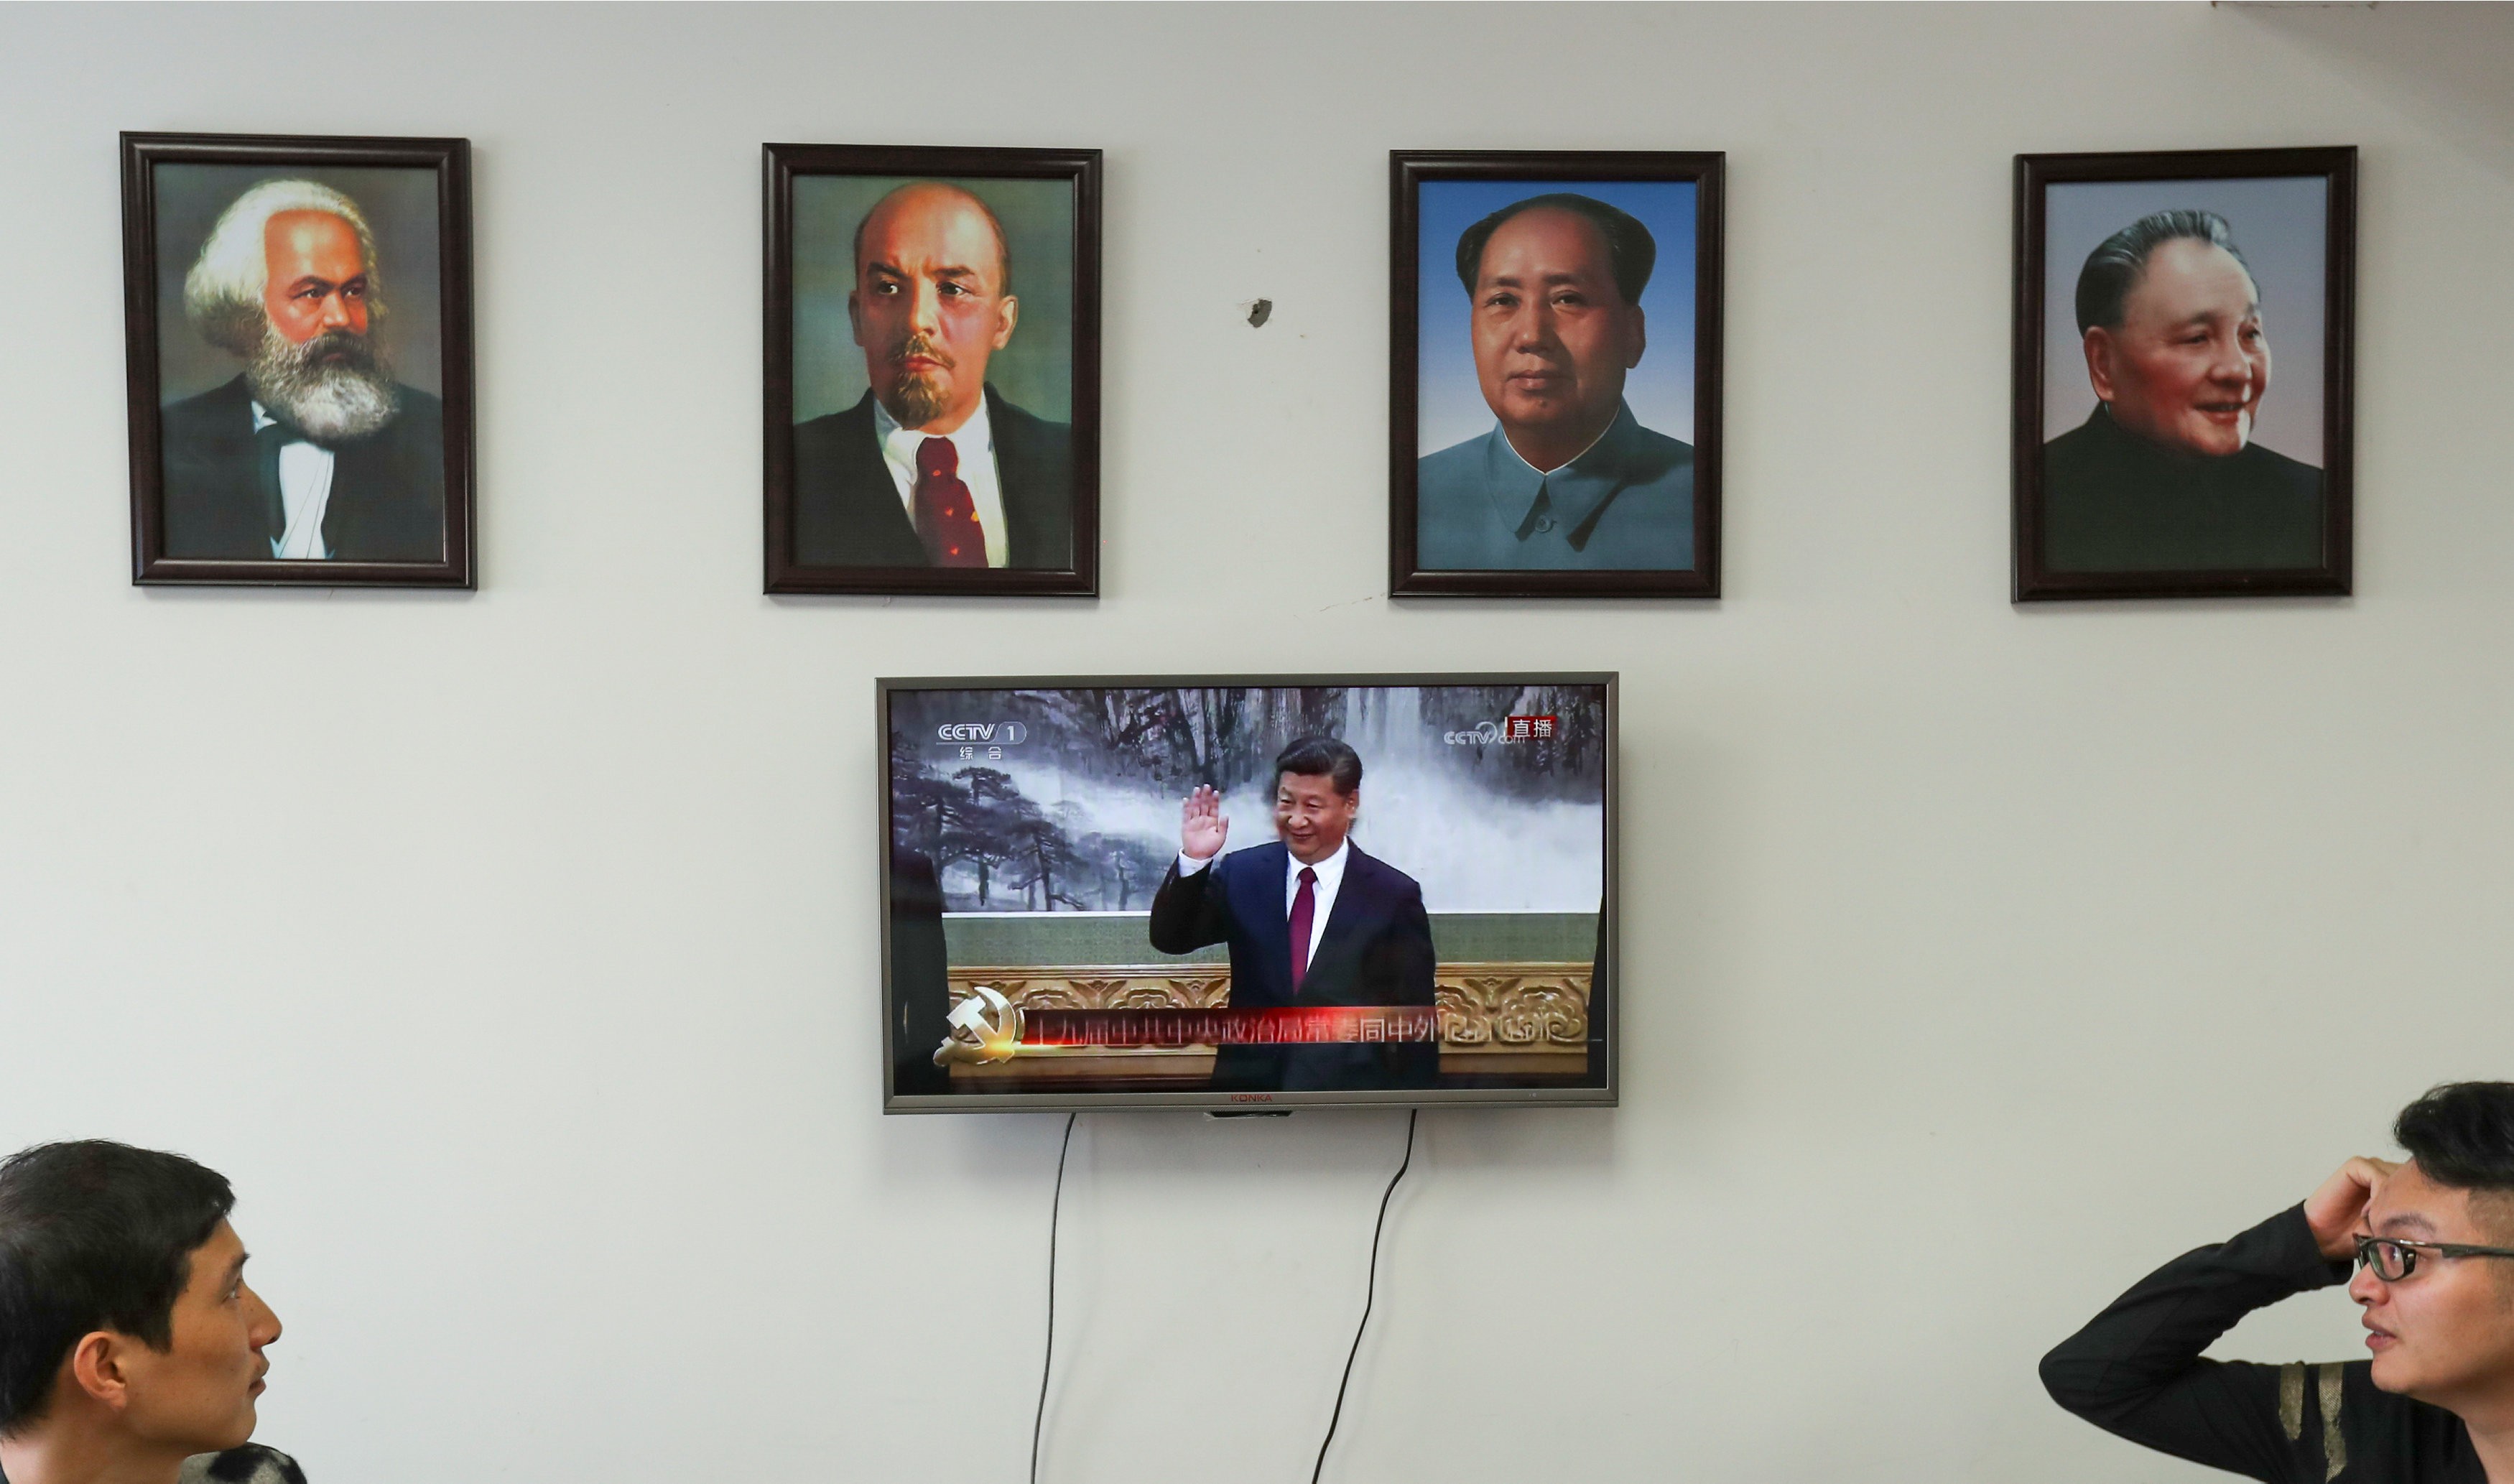 Framed portraits of German philosopher Karl Marx, Soviet state founder Vladimir Lenin and China's late leaders Mao Zedong and Deng Xiaoping (L-R) hang above a screen showing a news broadcast of China's President Xi Jinping attending a meeting in Beijing, as party members gather to watch the broadcast in Wenzhou, Zhejiang province, China October 25, 2017. Photo: Reuters